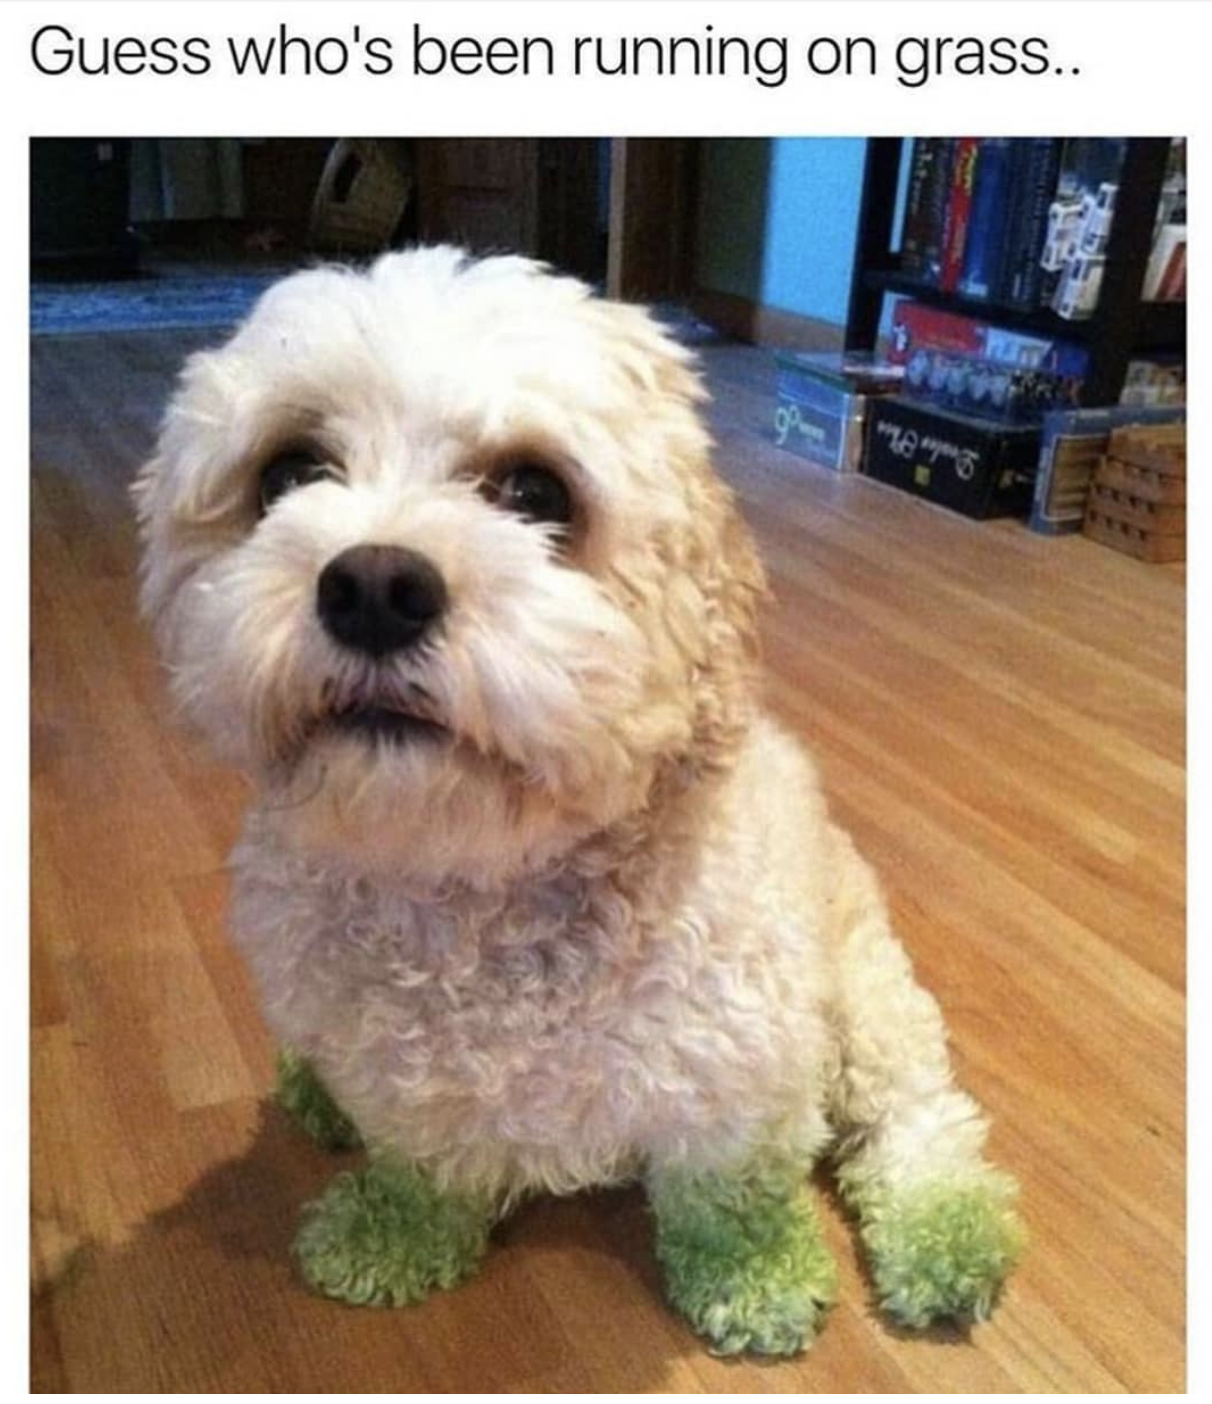 dog with grass stain - Guess who's been running on grass..